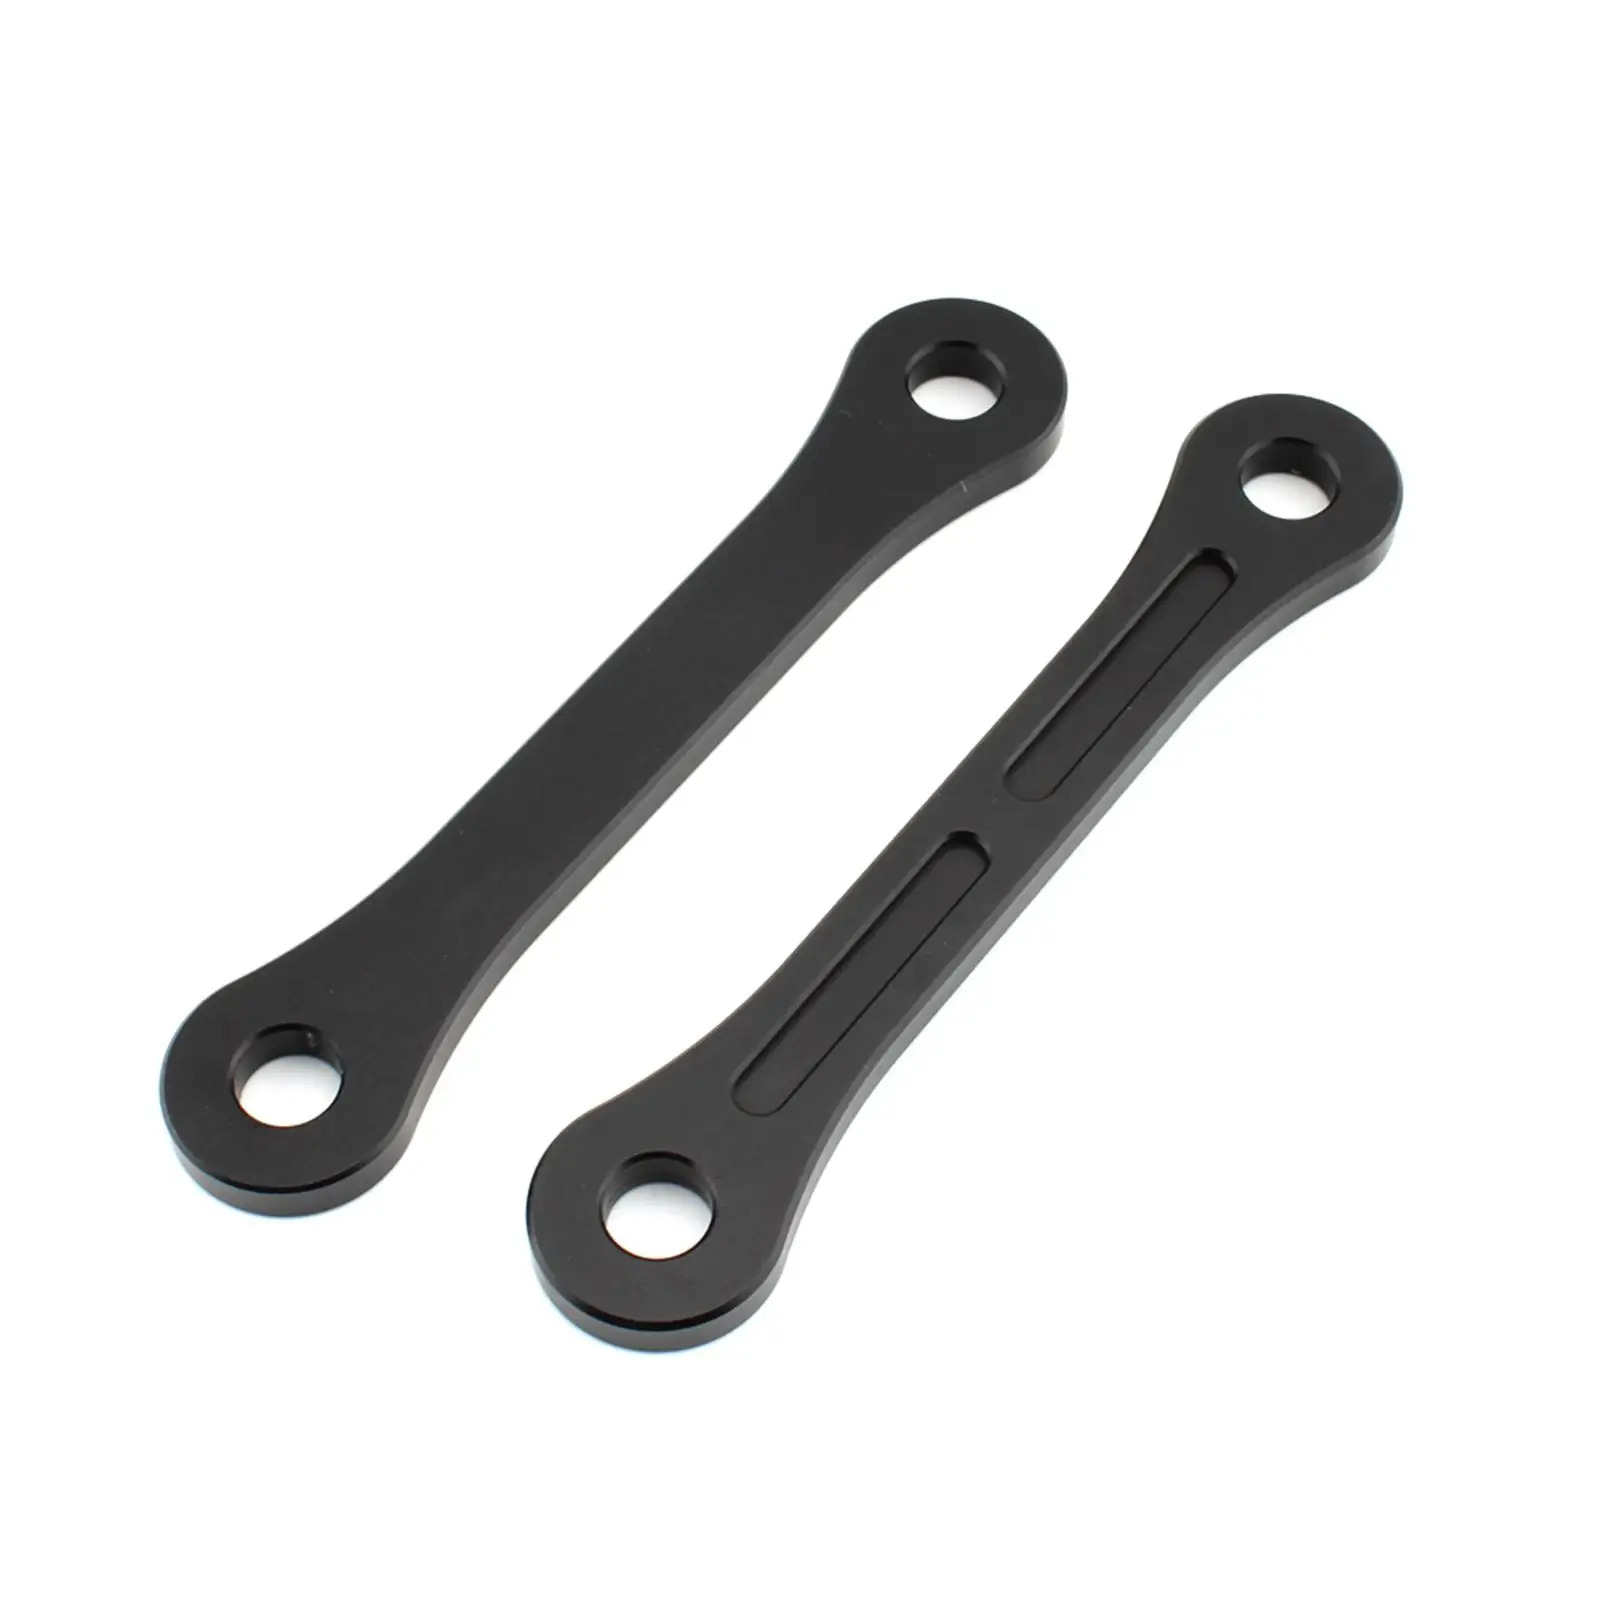 2 Pieces Motorcycle Lowering Drop Linkage ,Adjustable Accessories, Reinforced,